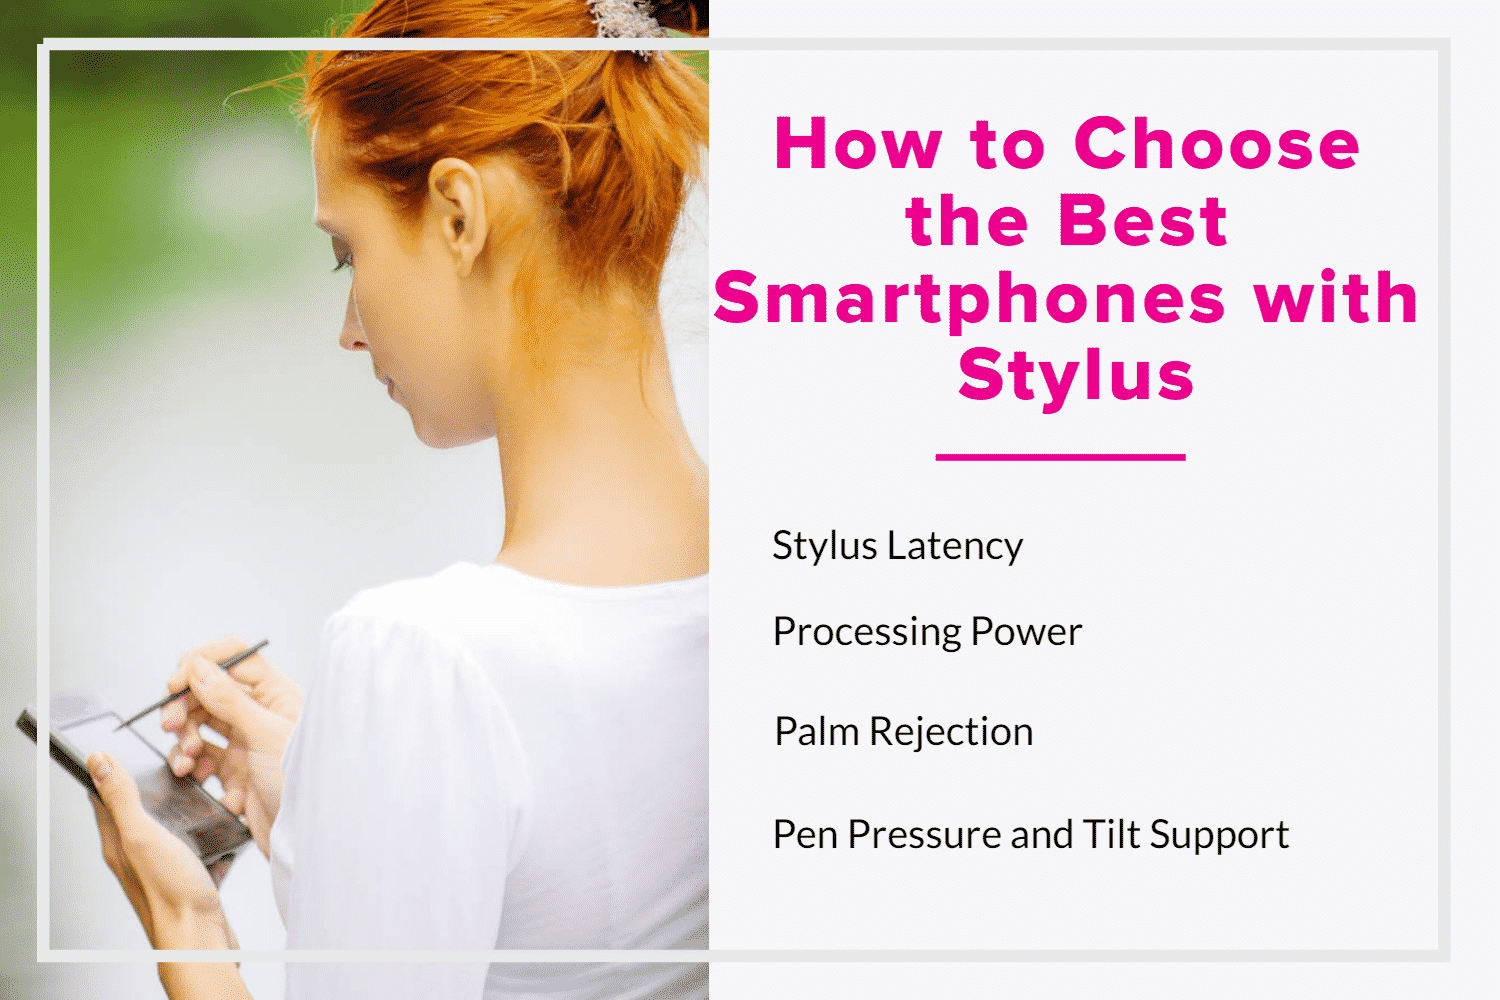 How to Choose the Best Smartphones with Stylus